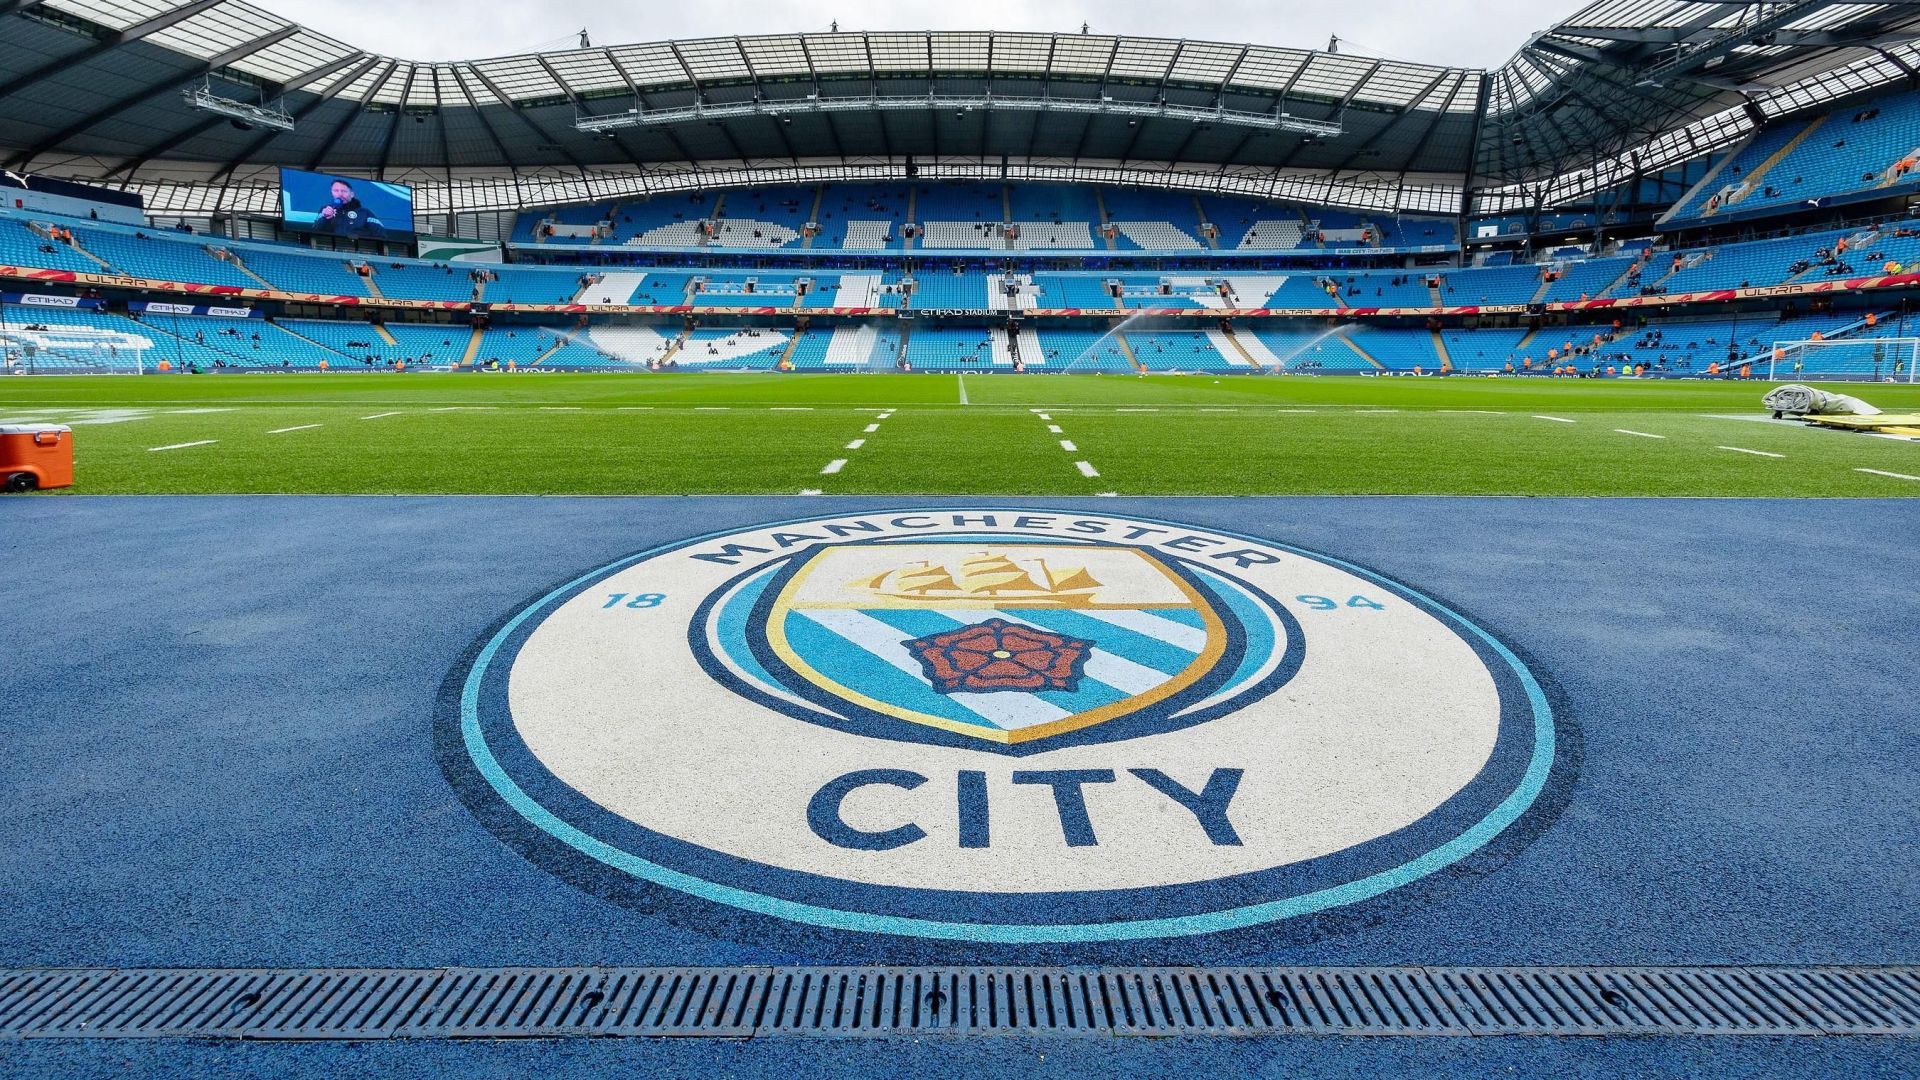 Manchester City has been under increasing scrutiny over its financial affairs, with questions about whether they adhere to FFP regulations.